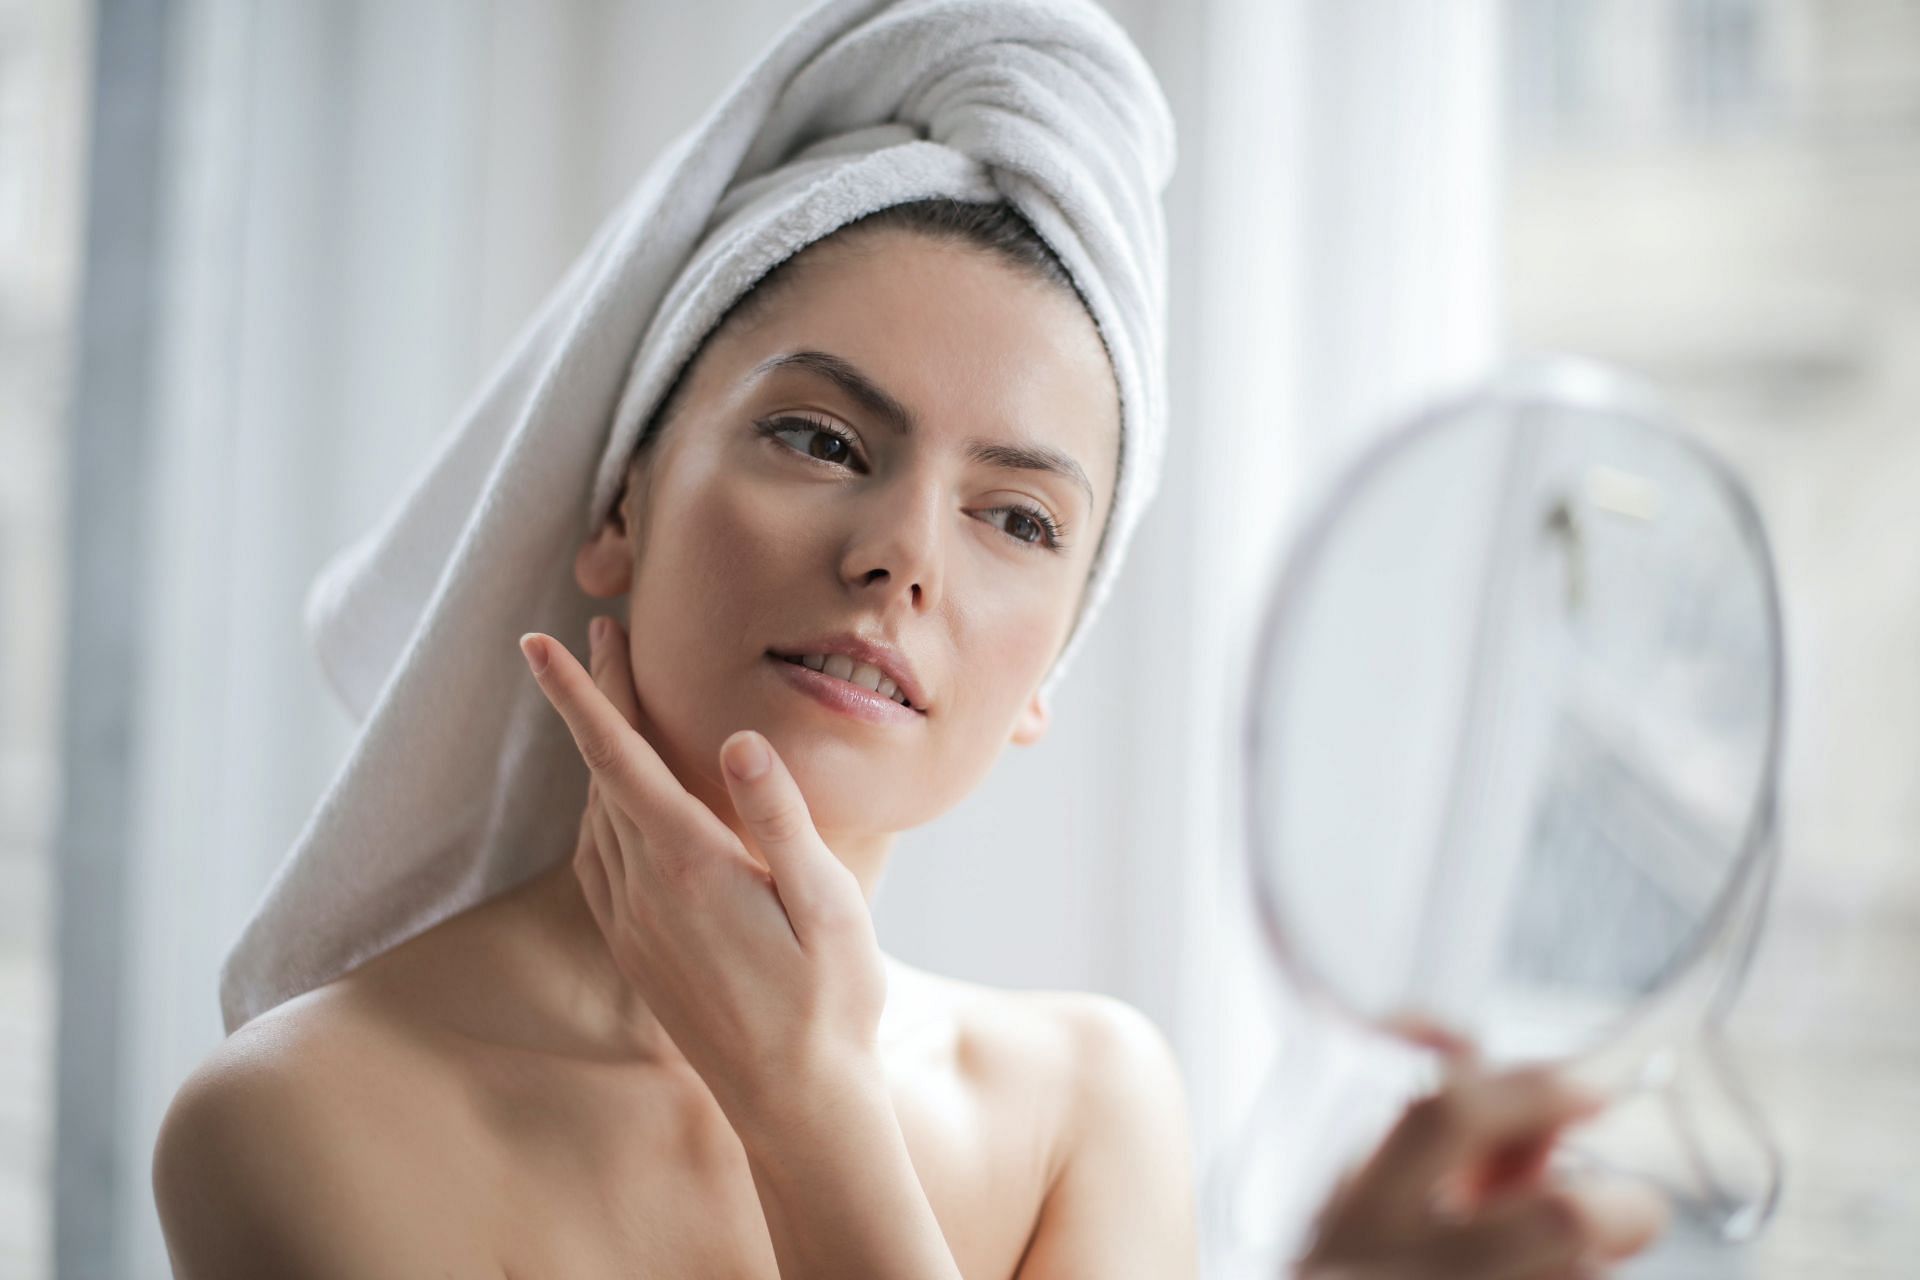 Importance of facelift (image sourced via Pexels / Photo by andrea)